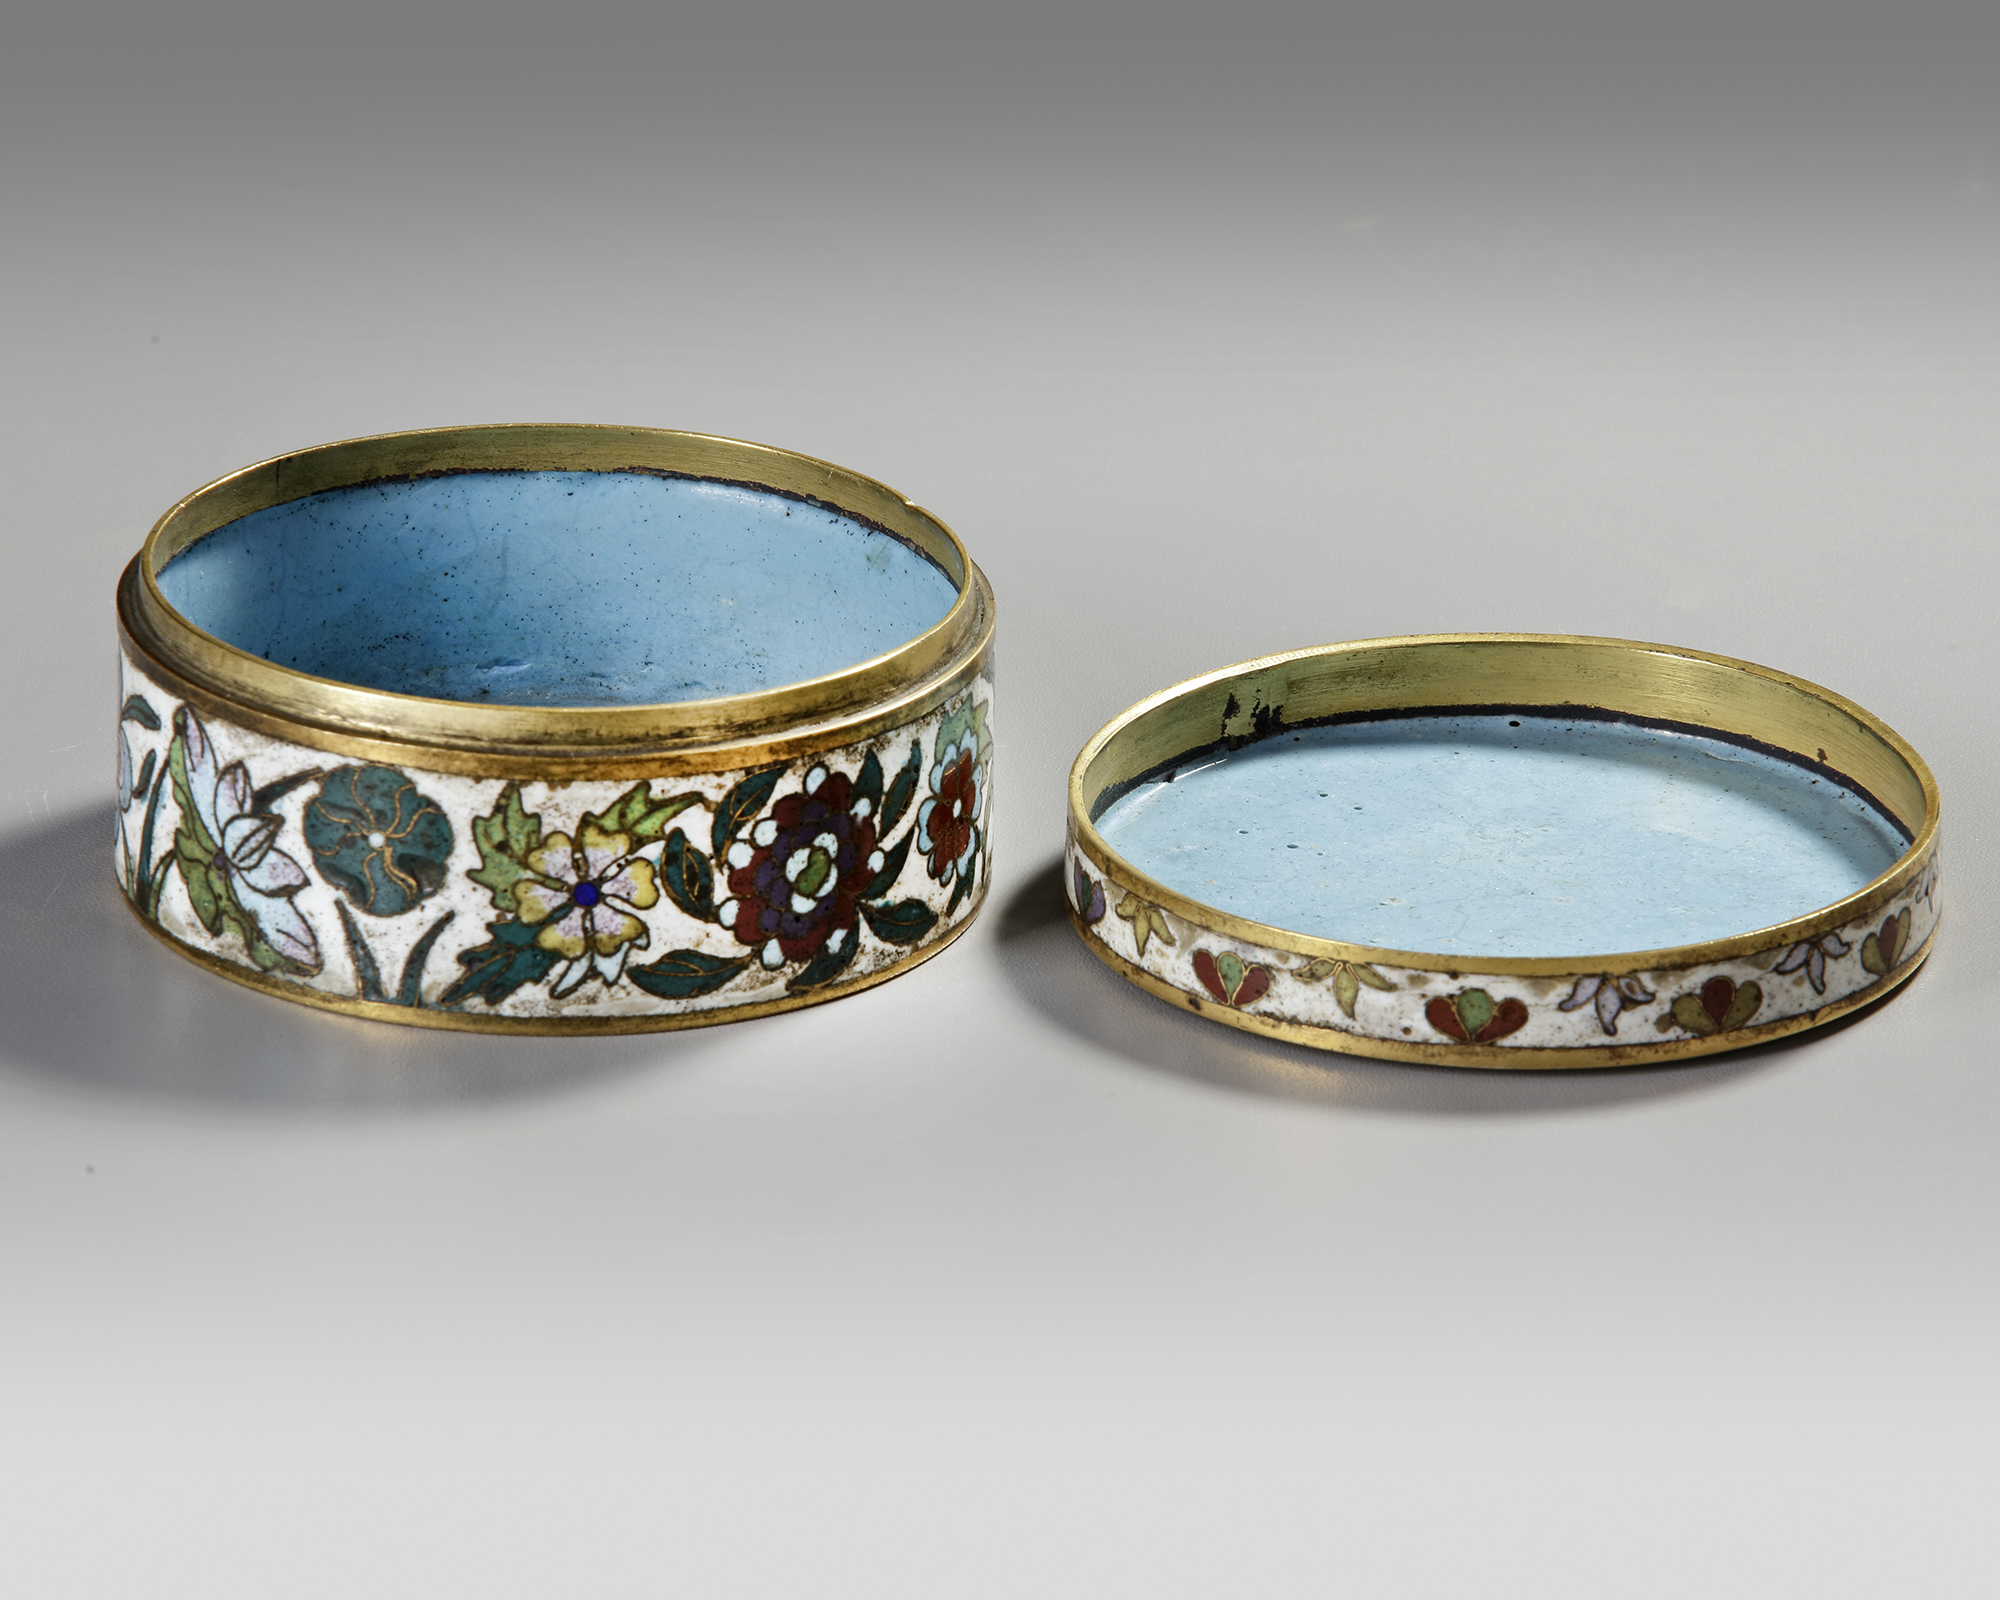 A CHINESE CLOISONNÉ ENAMEL BOX, 19TH CENTURY - Image 3 of 4